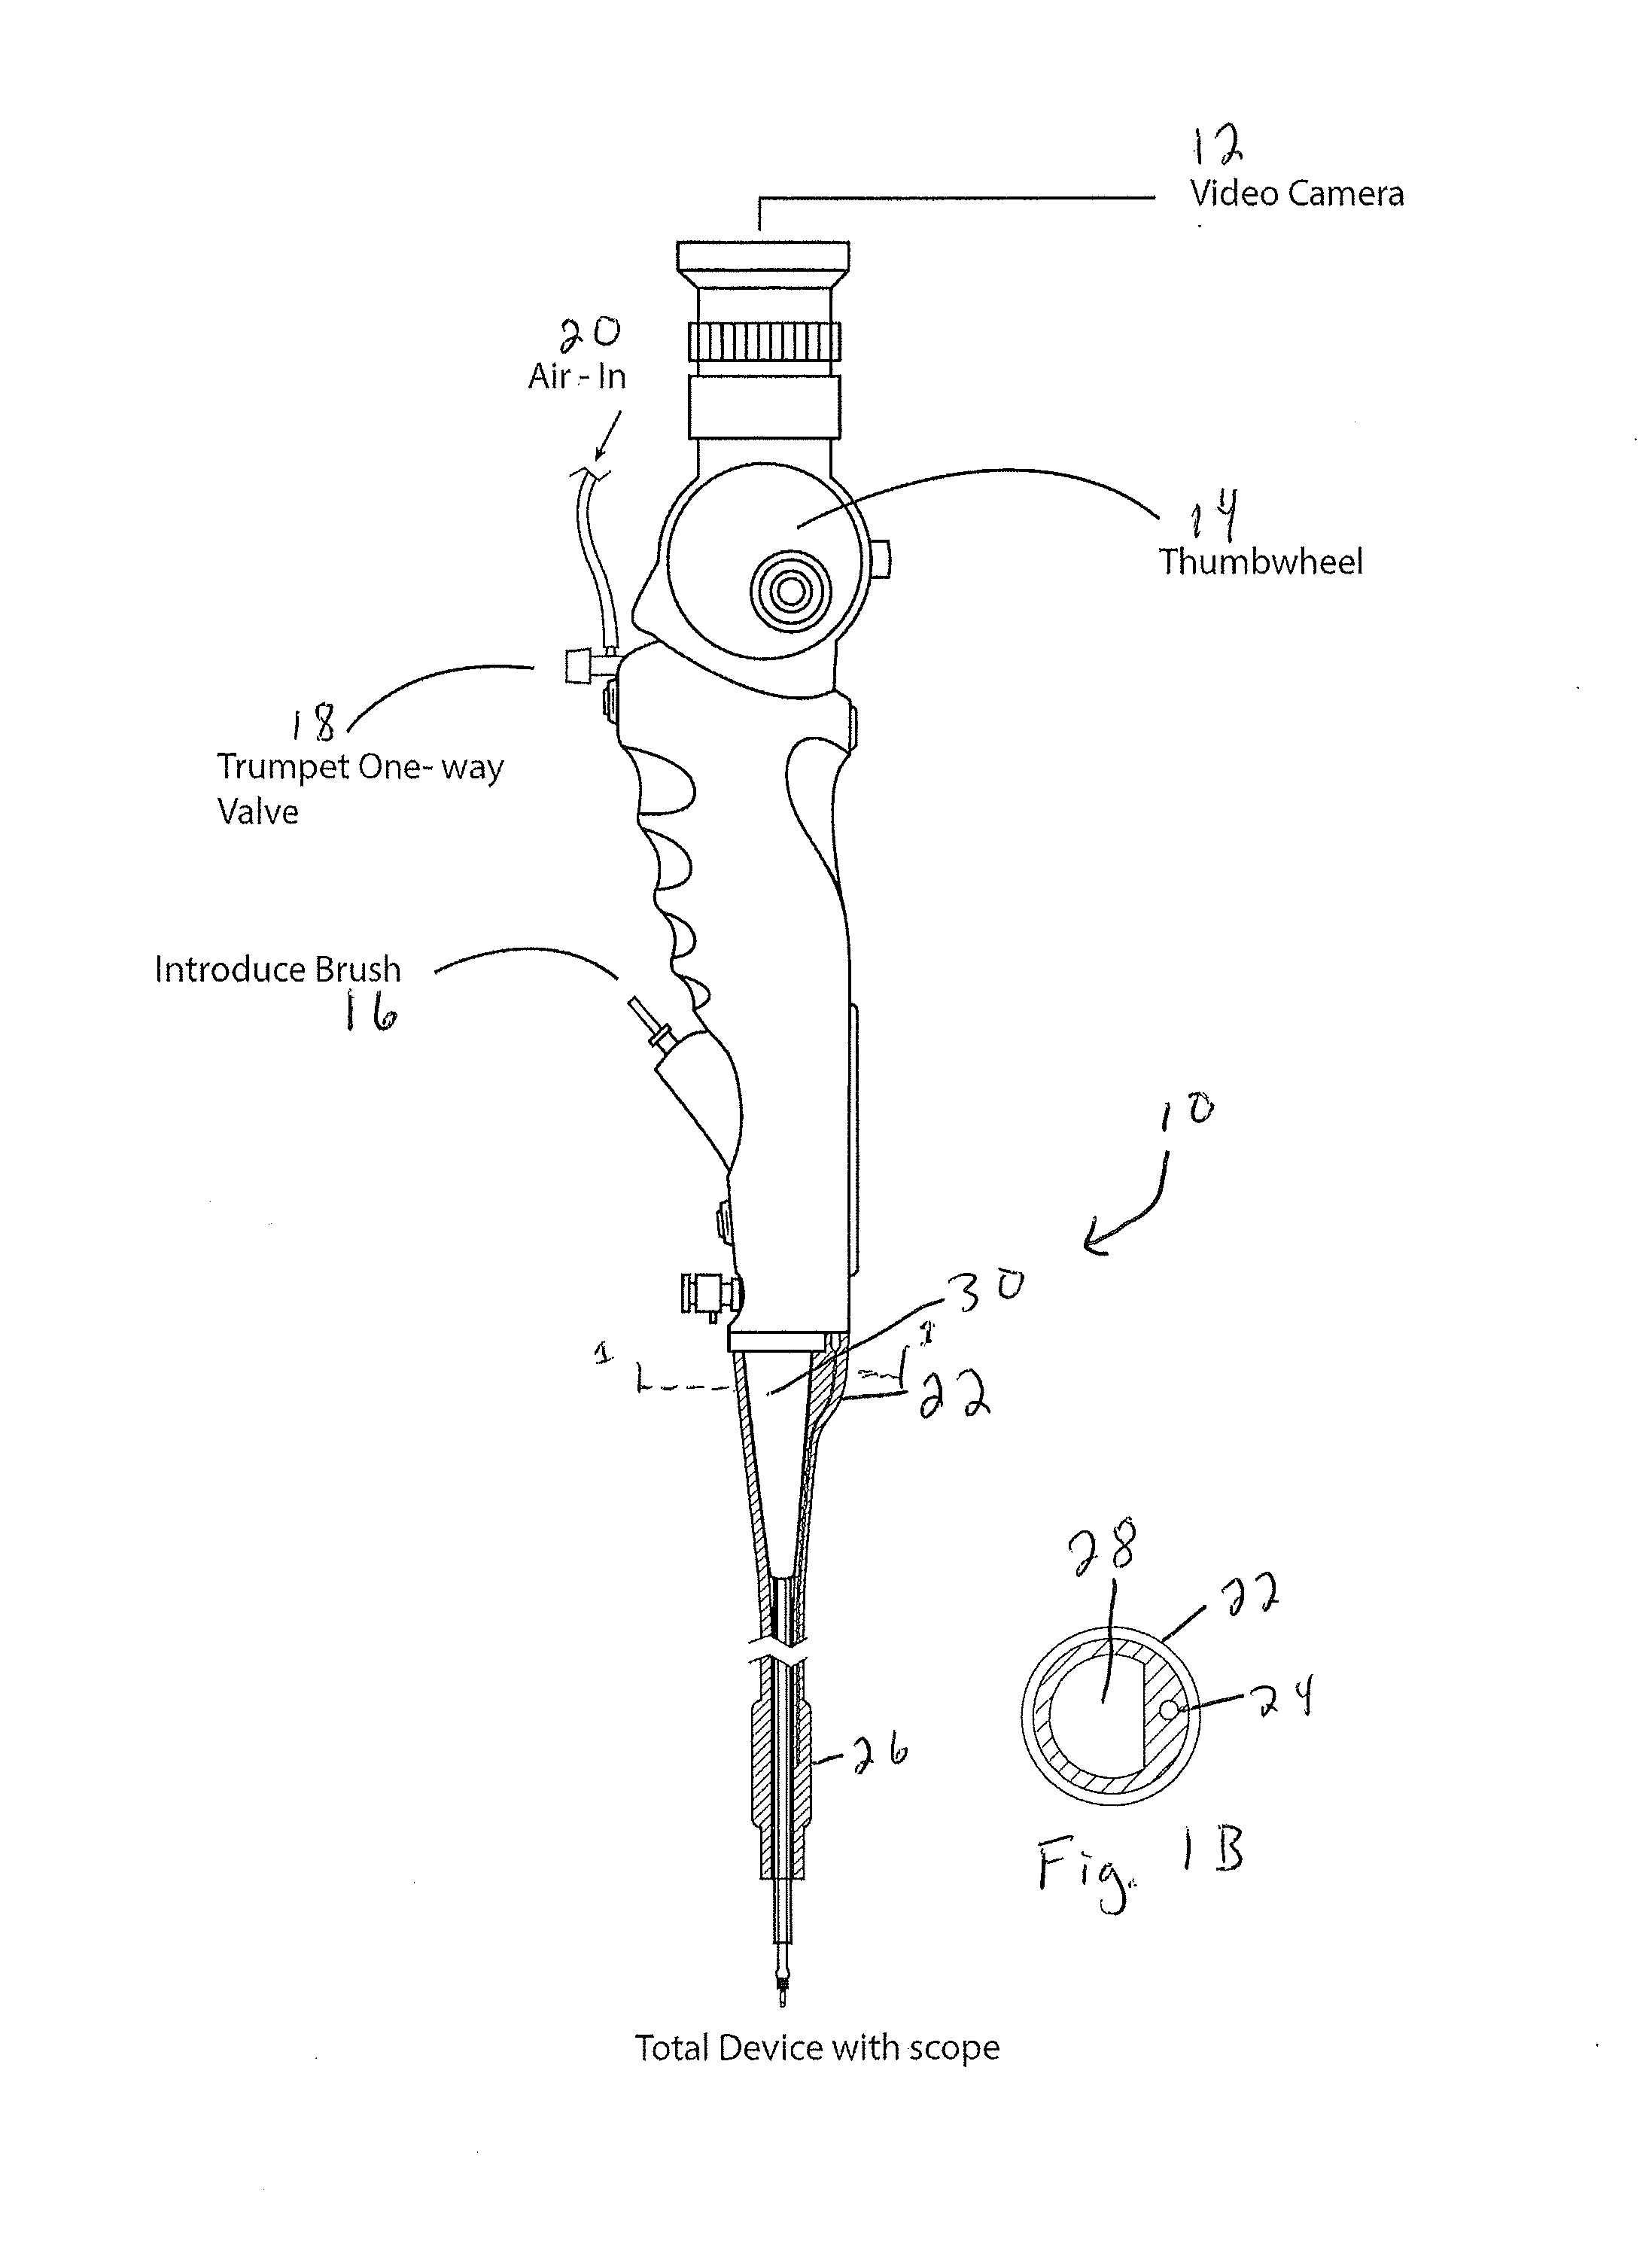 Apparatus and method for ovarian cancer screening